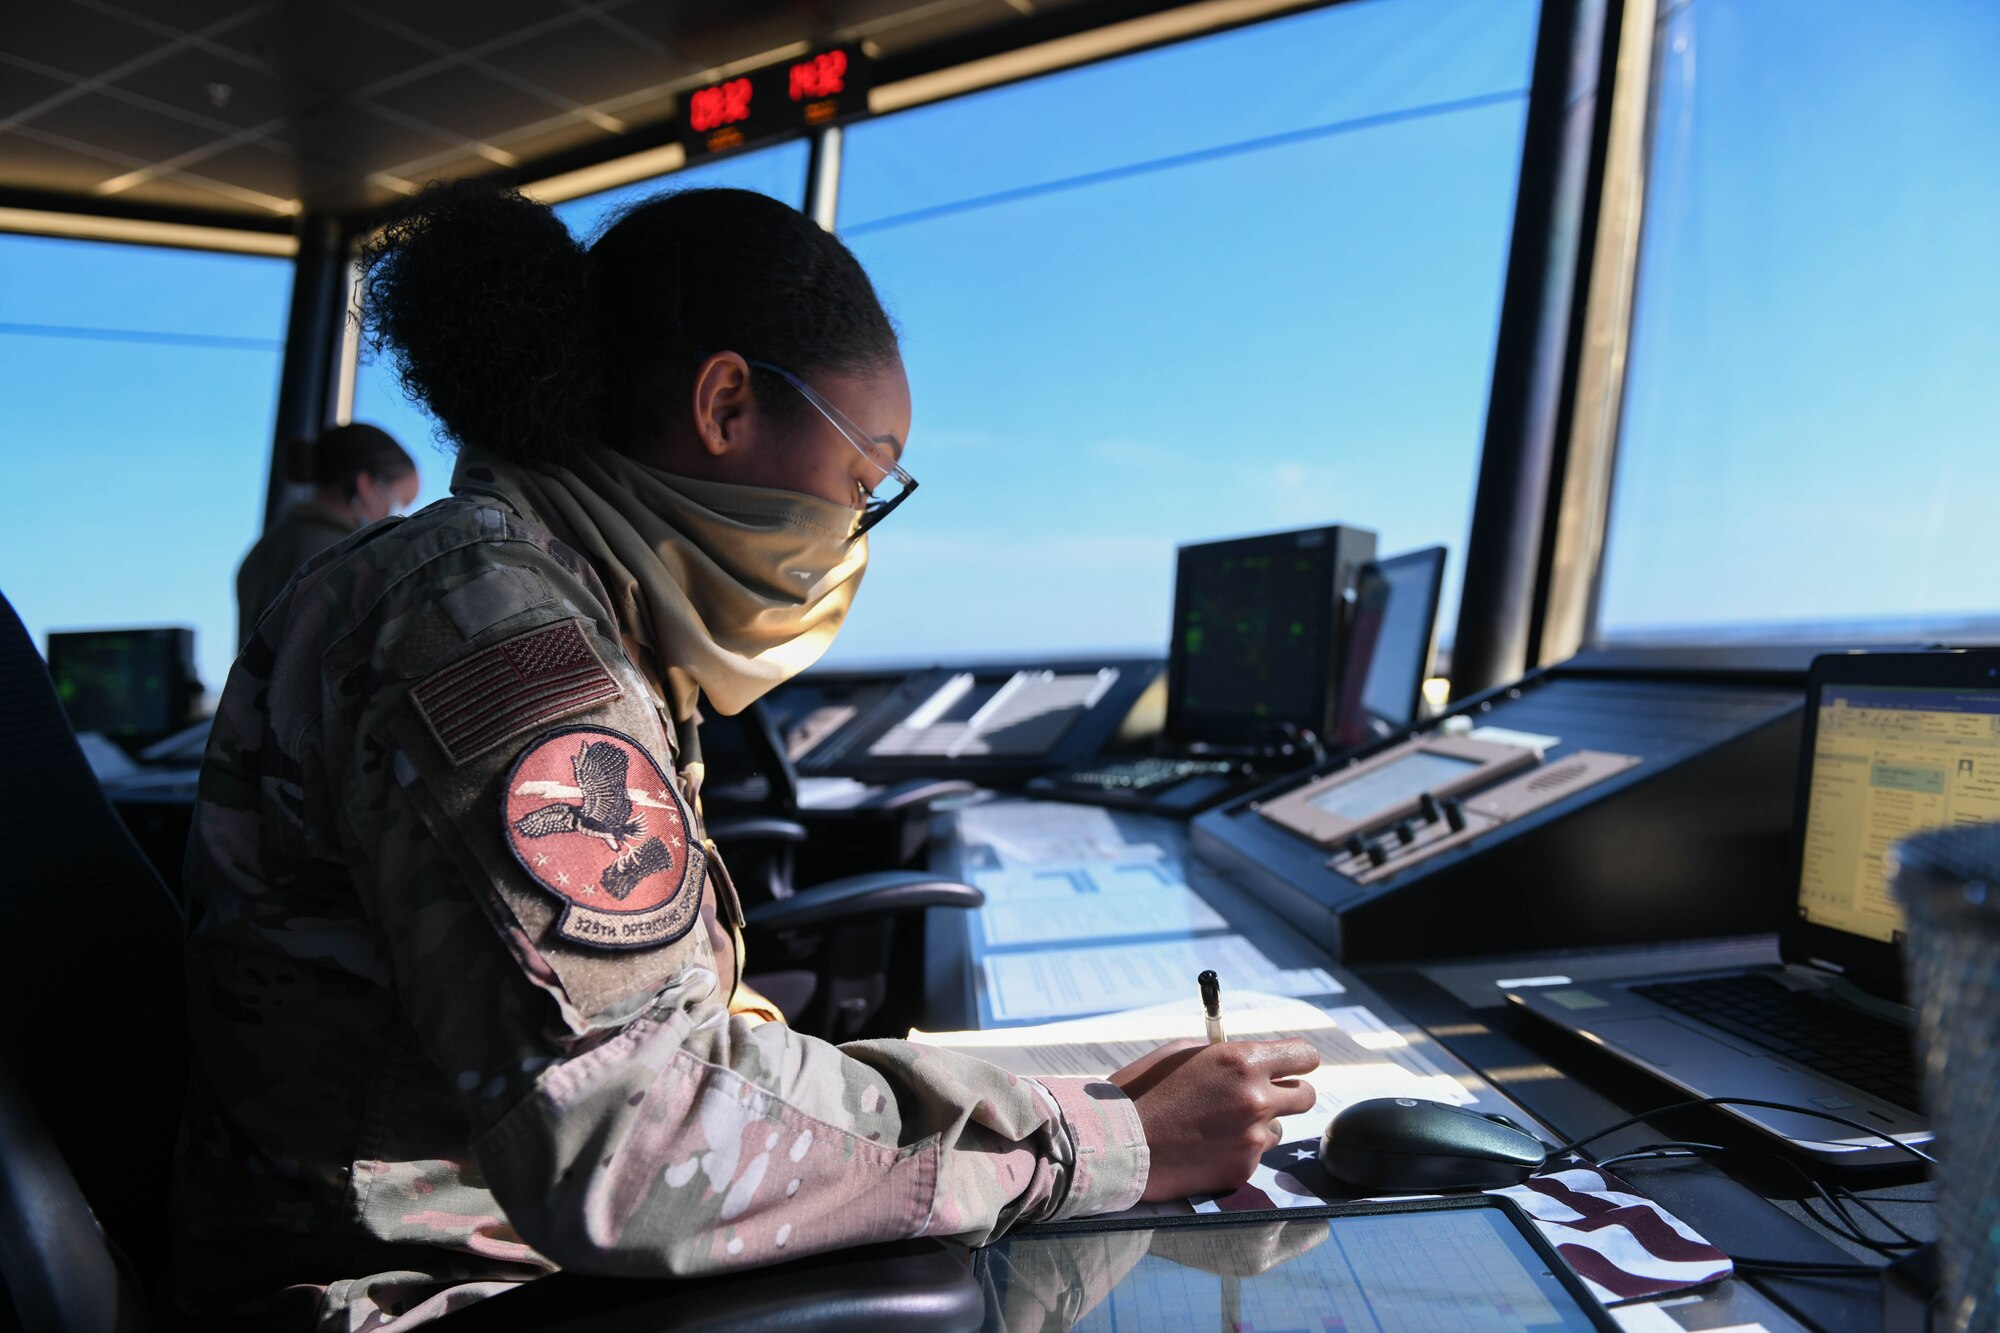 An Airman completes her paperwork in the air traffic control tower at Tyndall Air Force Base.